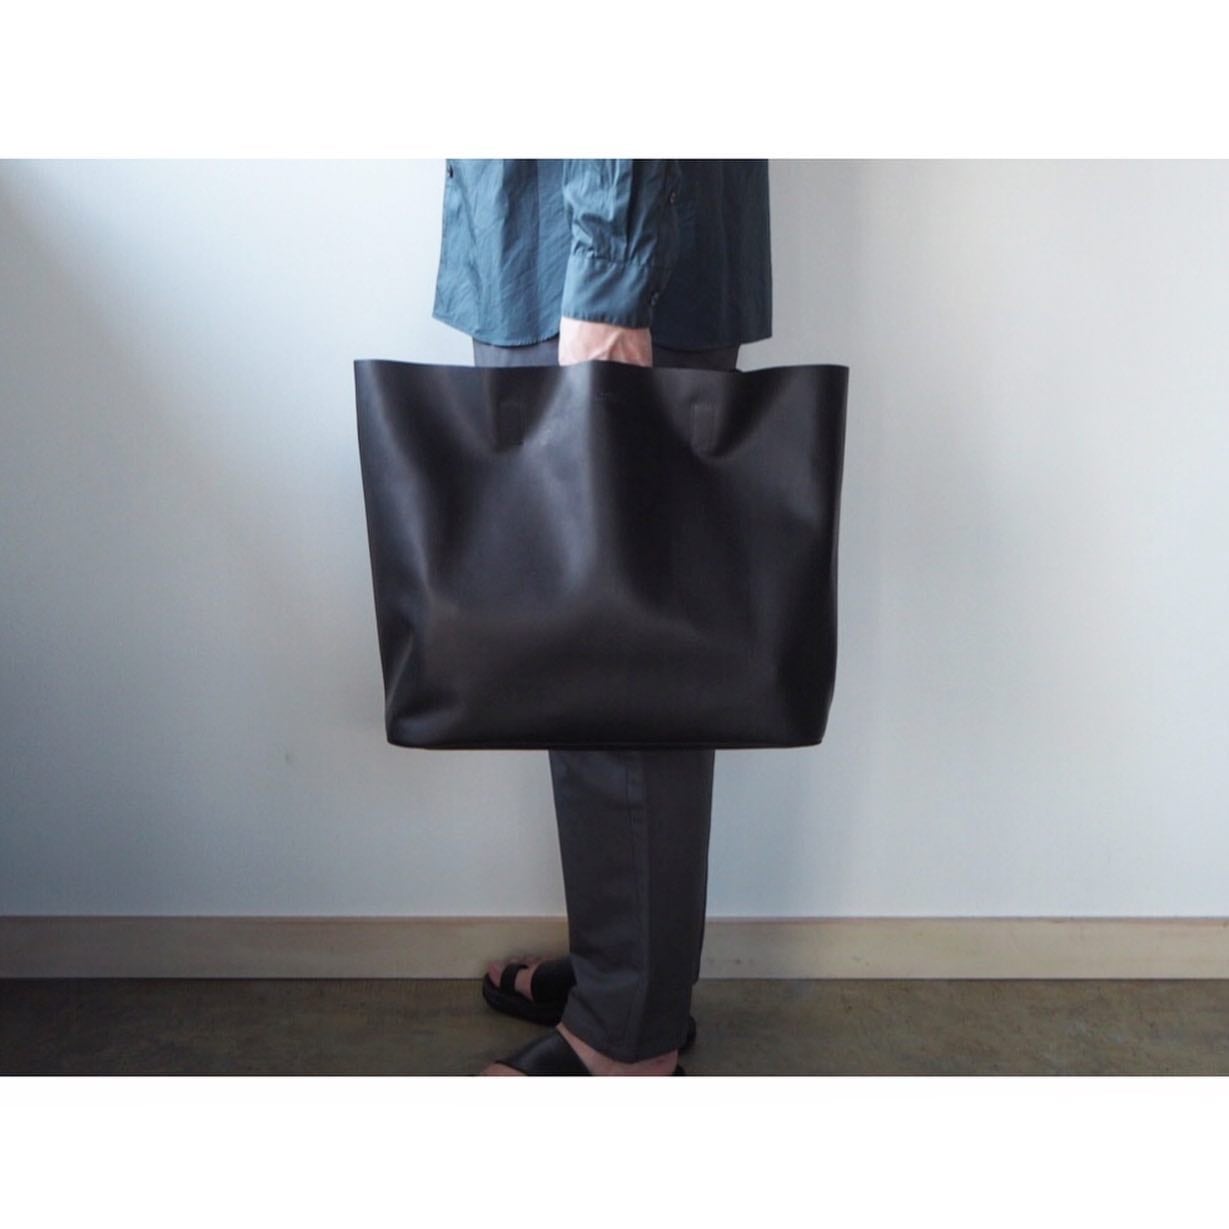 SLOW(スロウ) Vegetal Tote bag M | AUTHENTIC Life Store powered by BASE